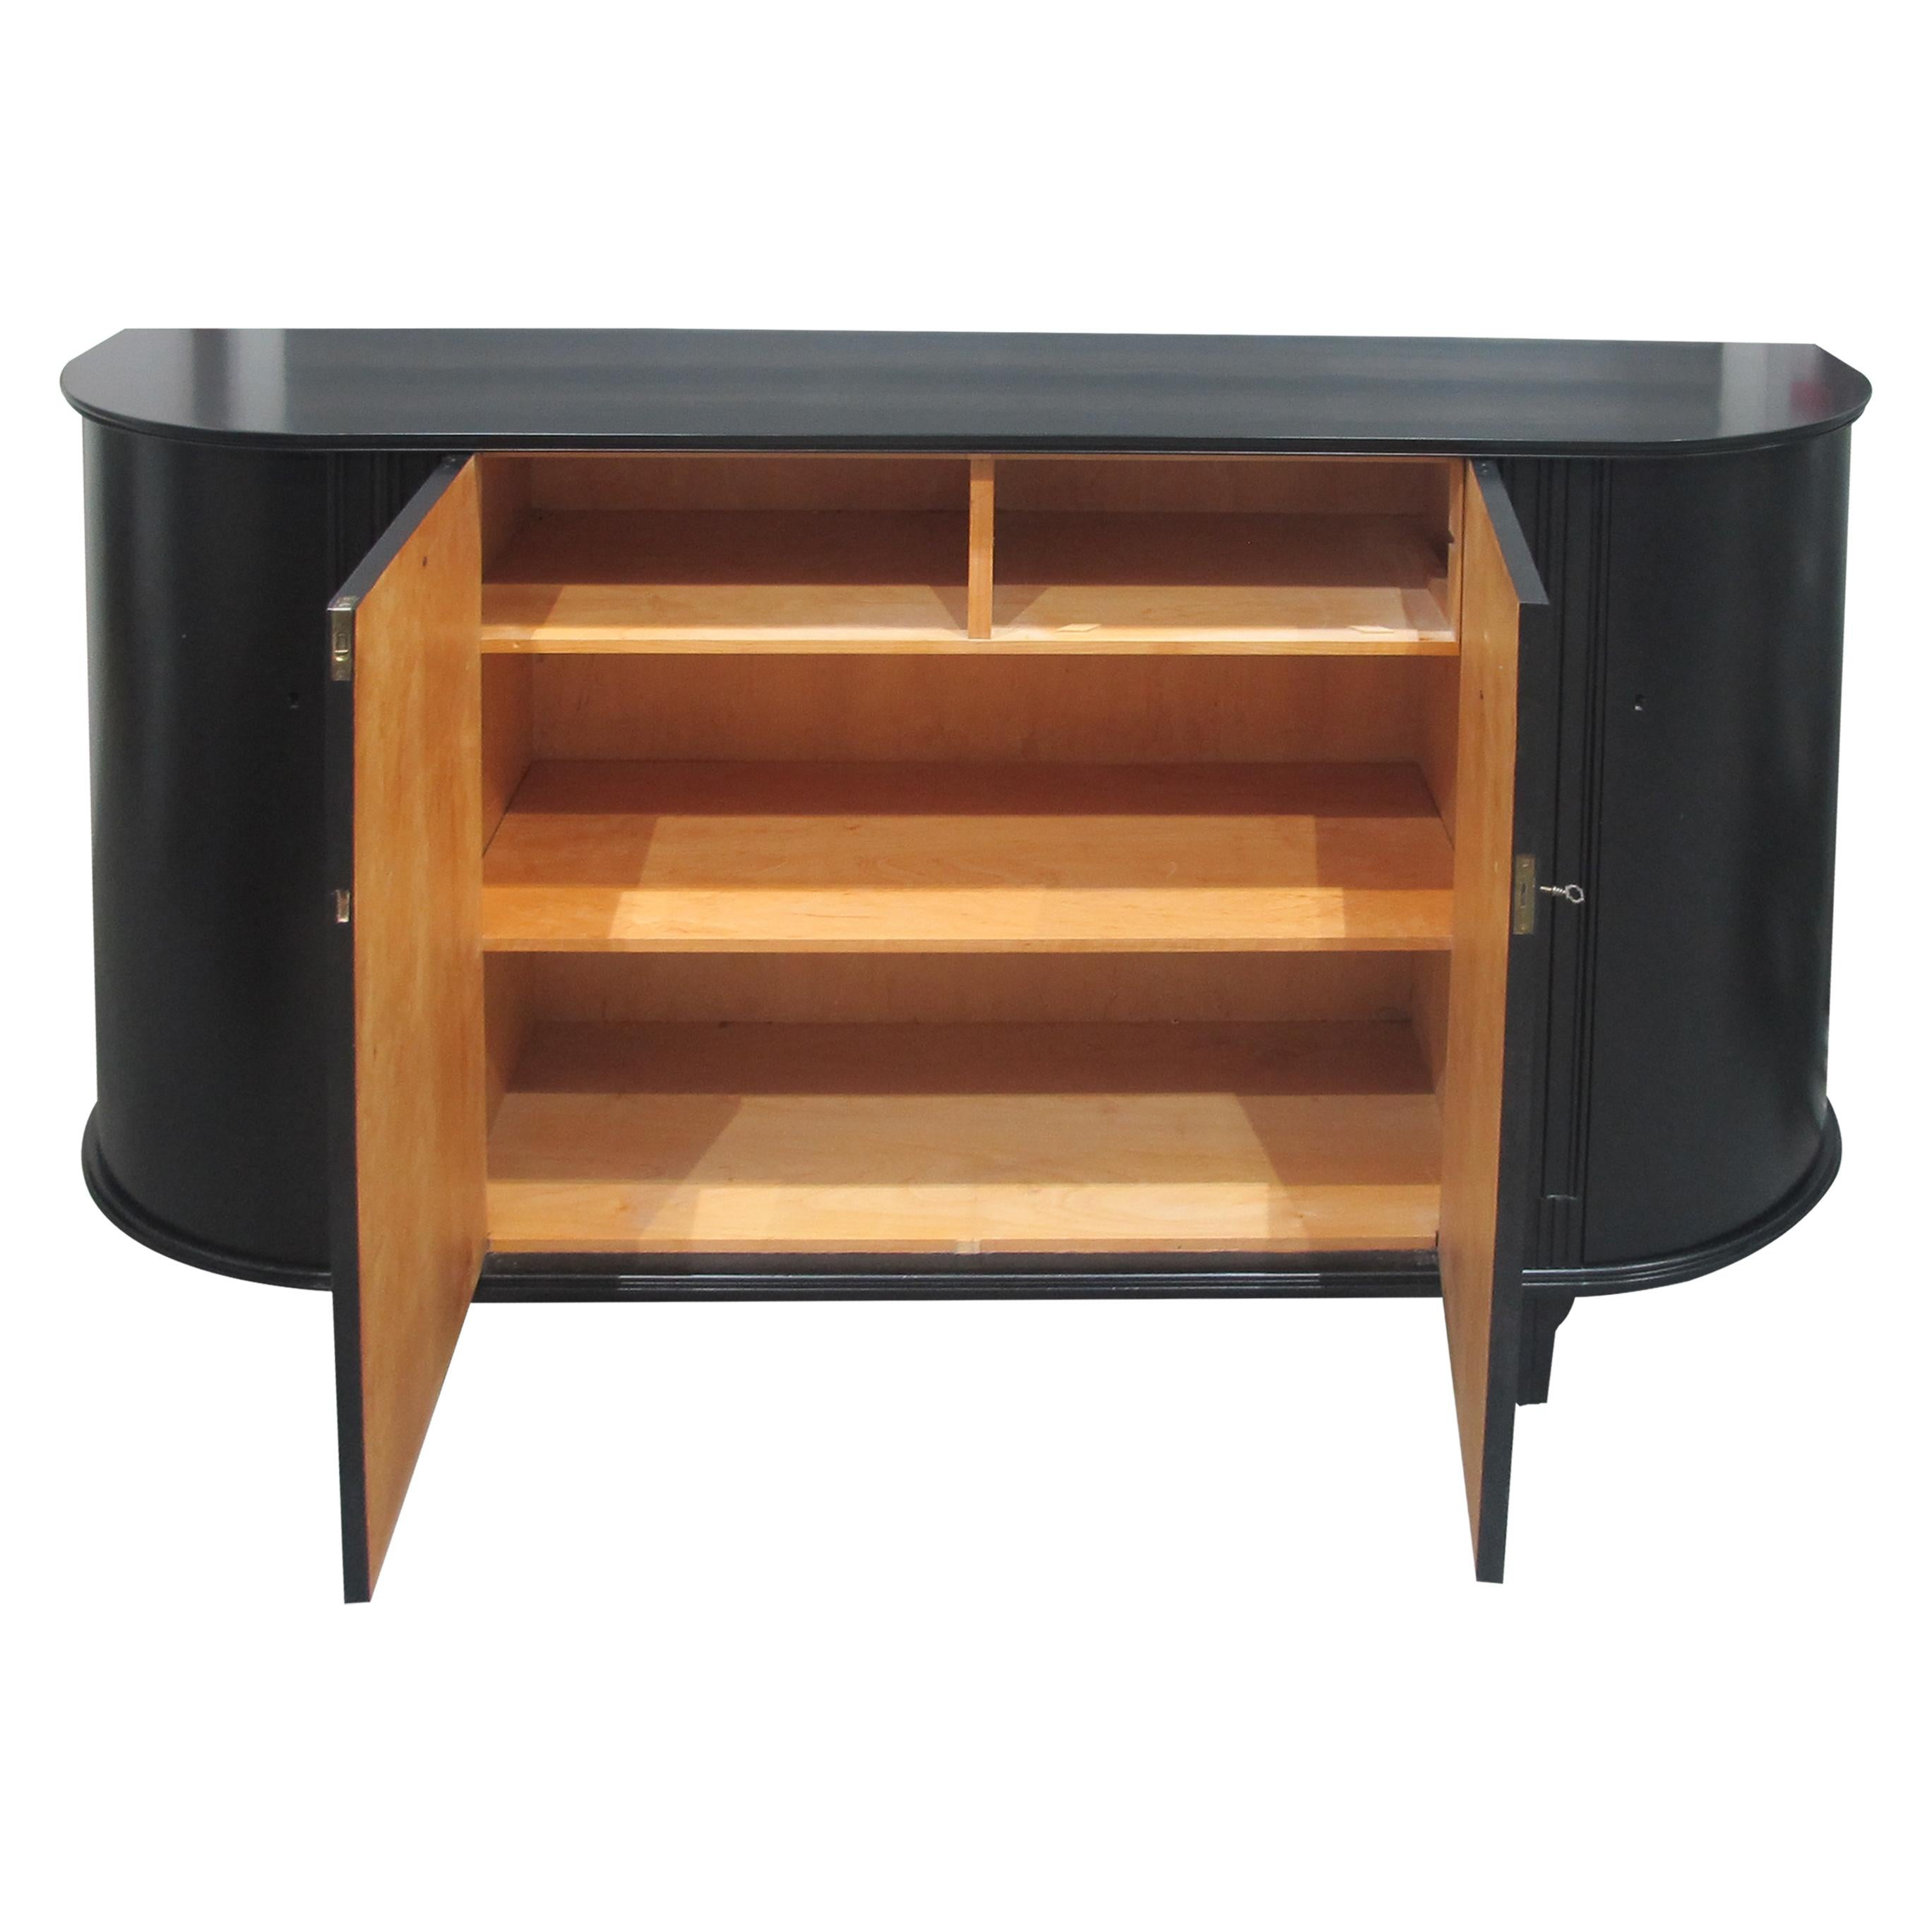 Painted 1950s Midcentury Scandinavian Large Black Tall Bow Fronted Sideboard Credenza